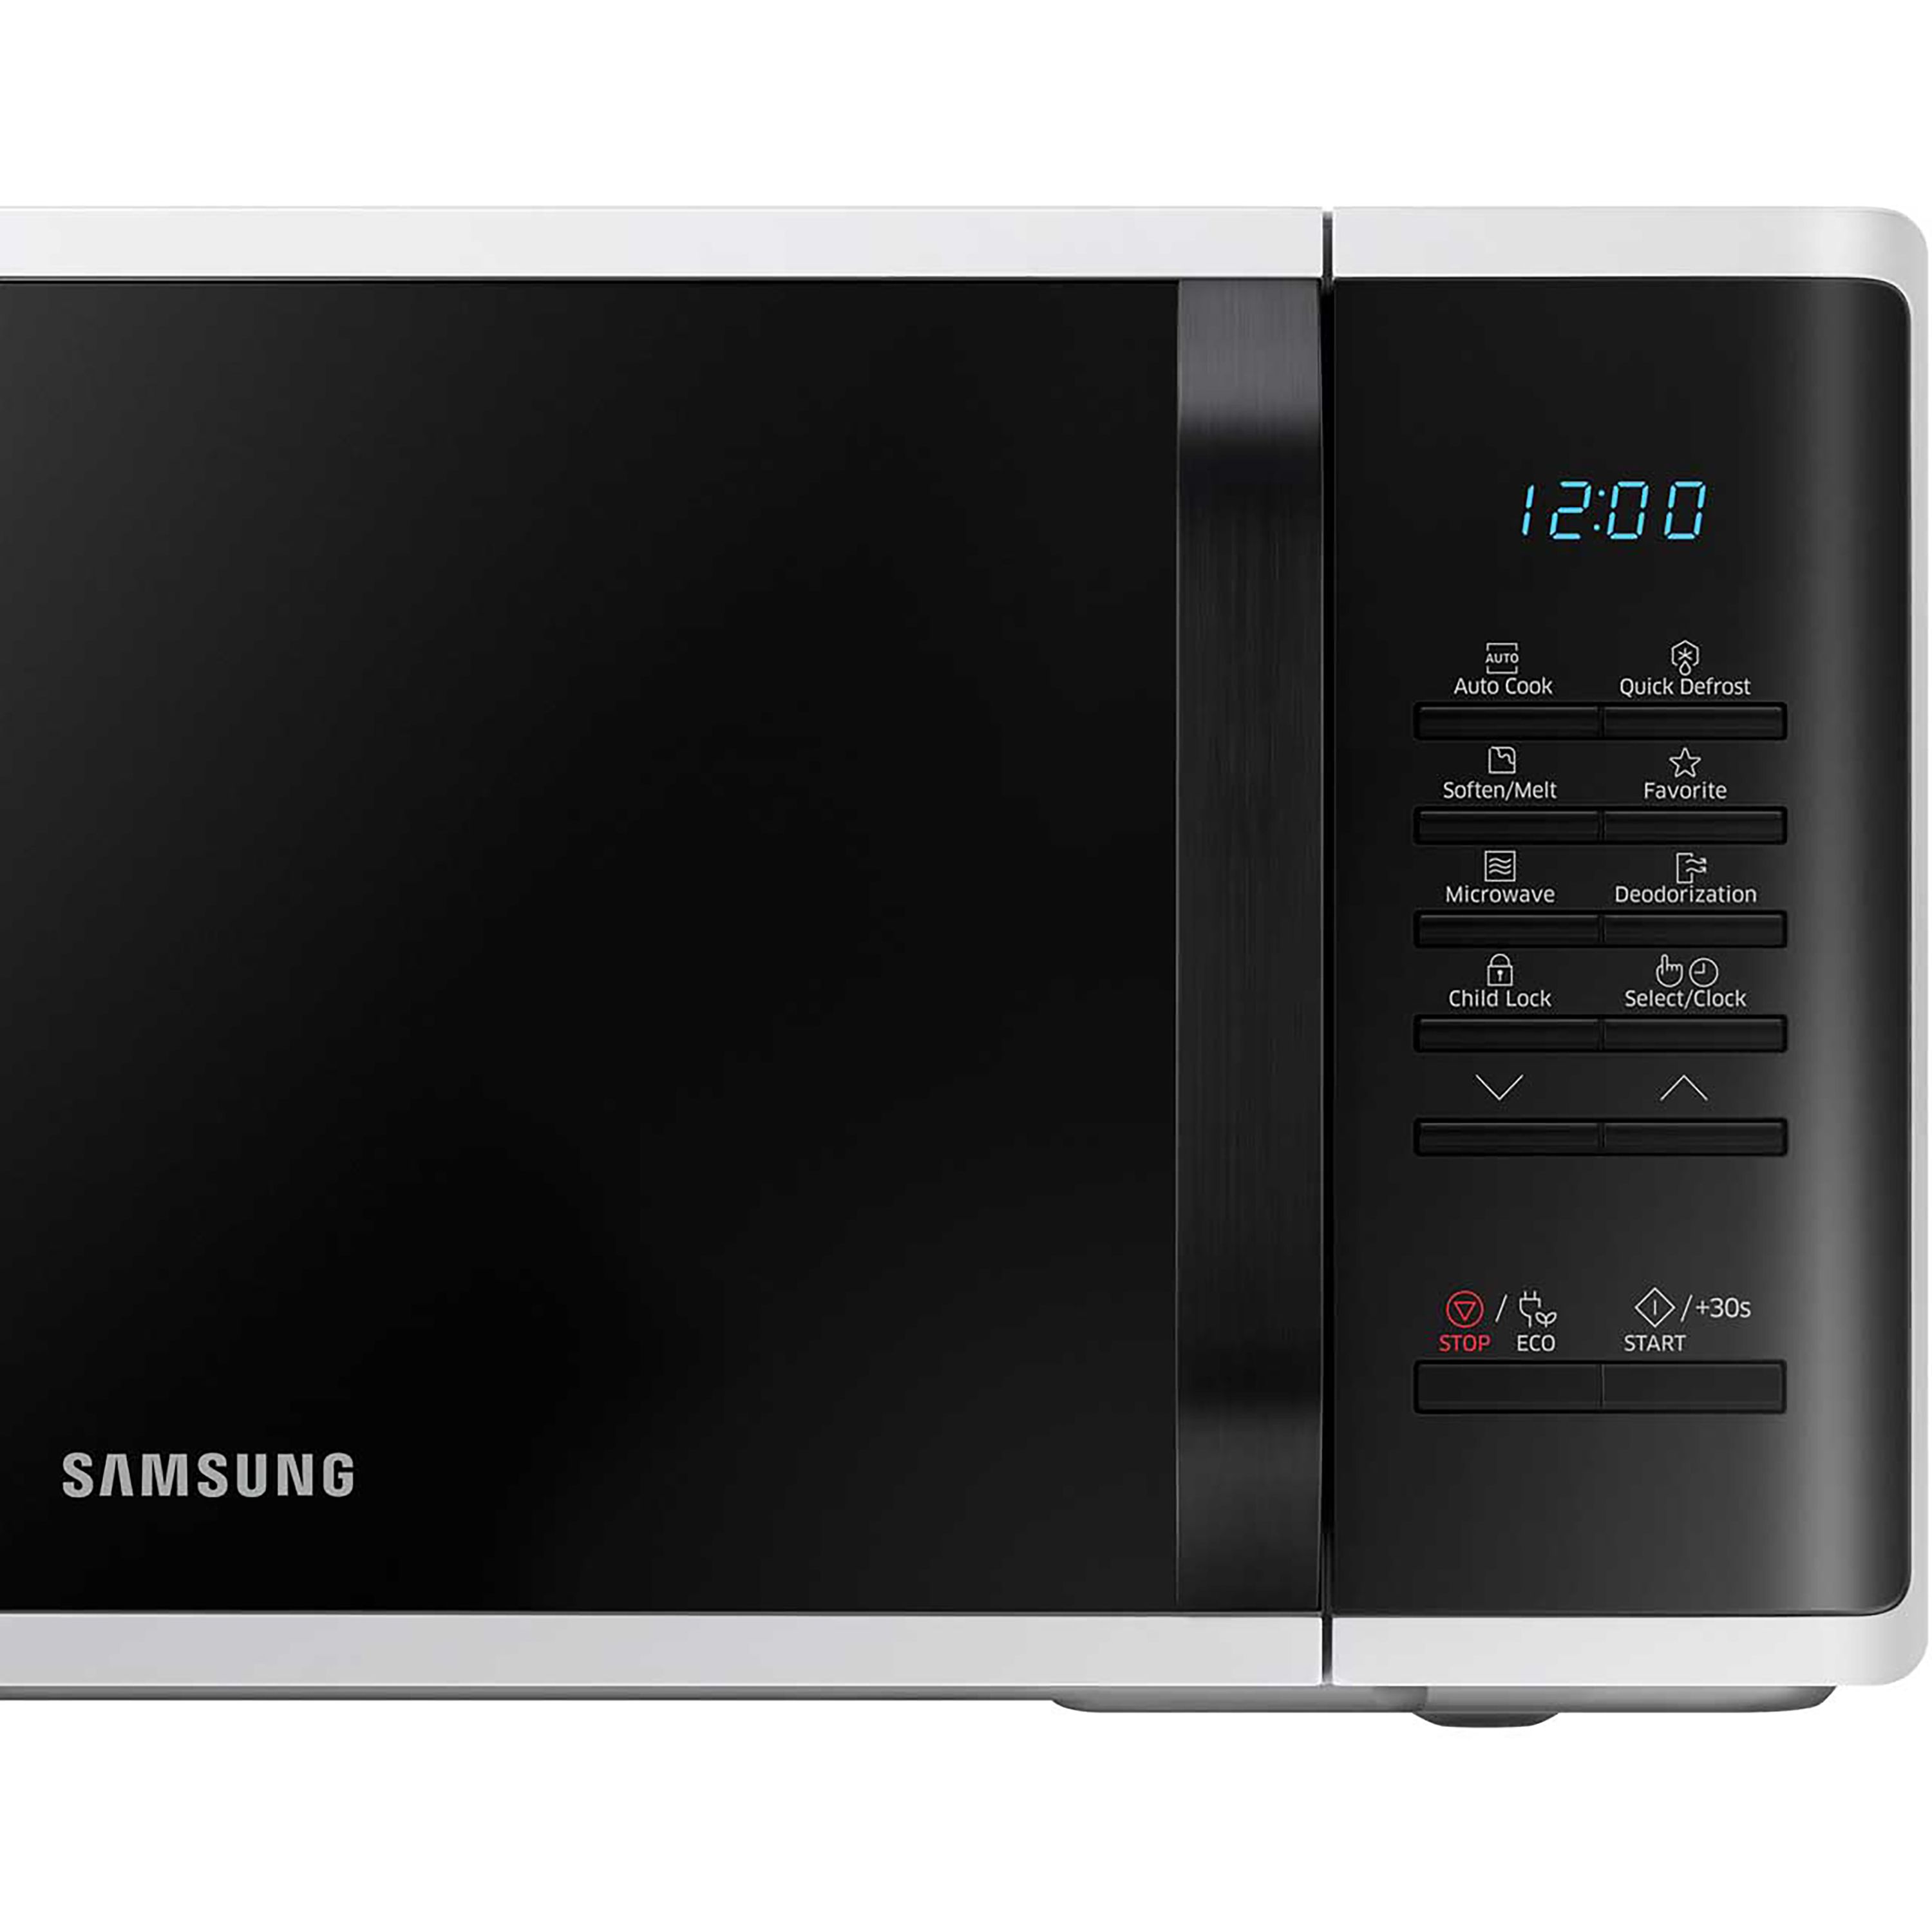 Samsung MS23K3513AW_WH 23L Freestanding Microwave - White